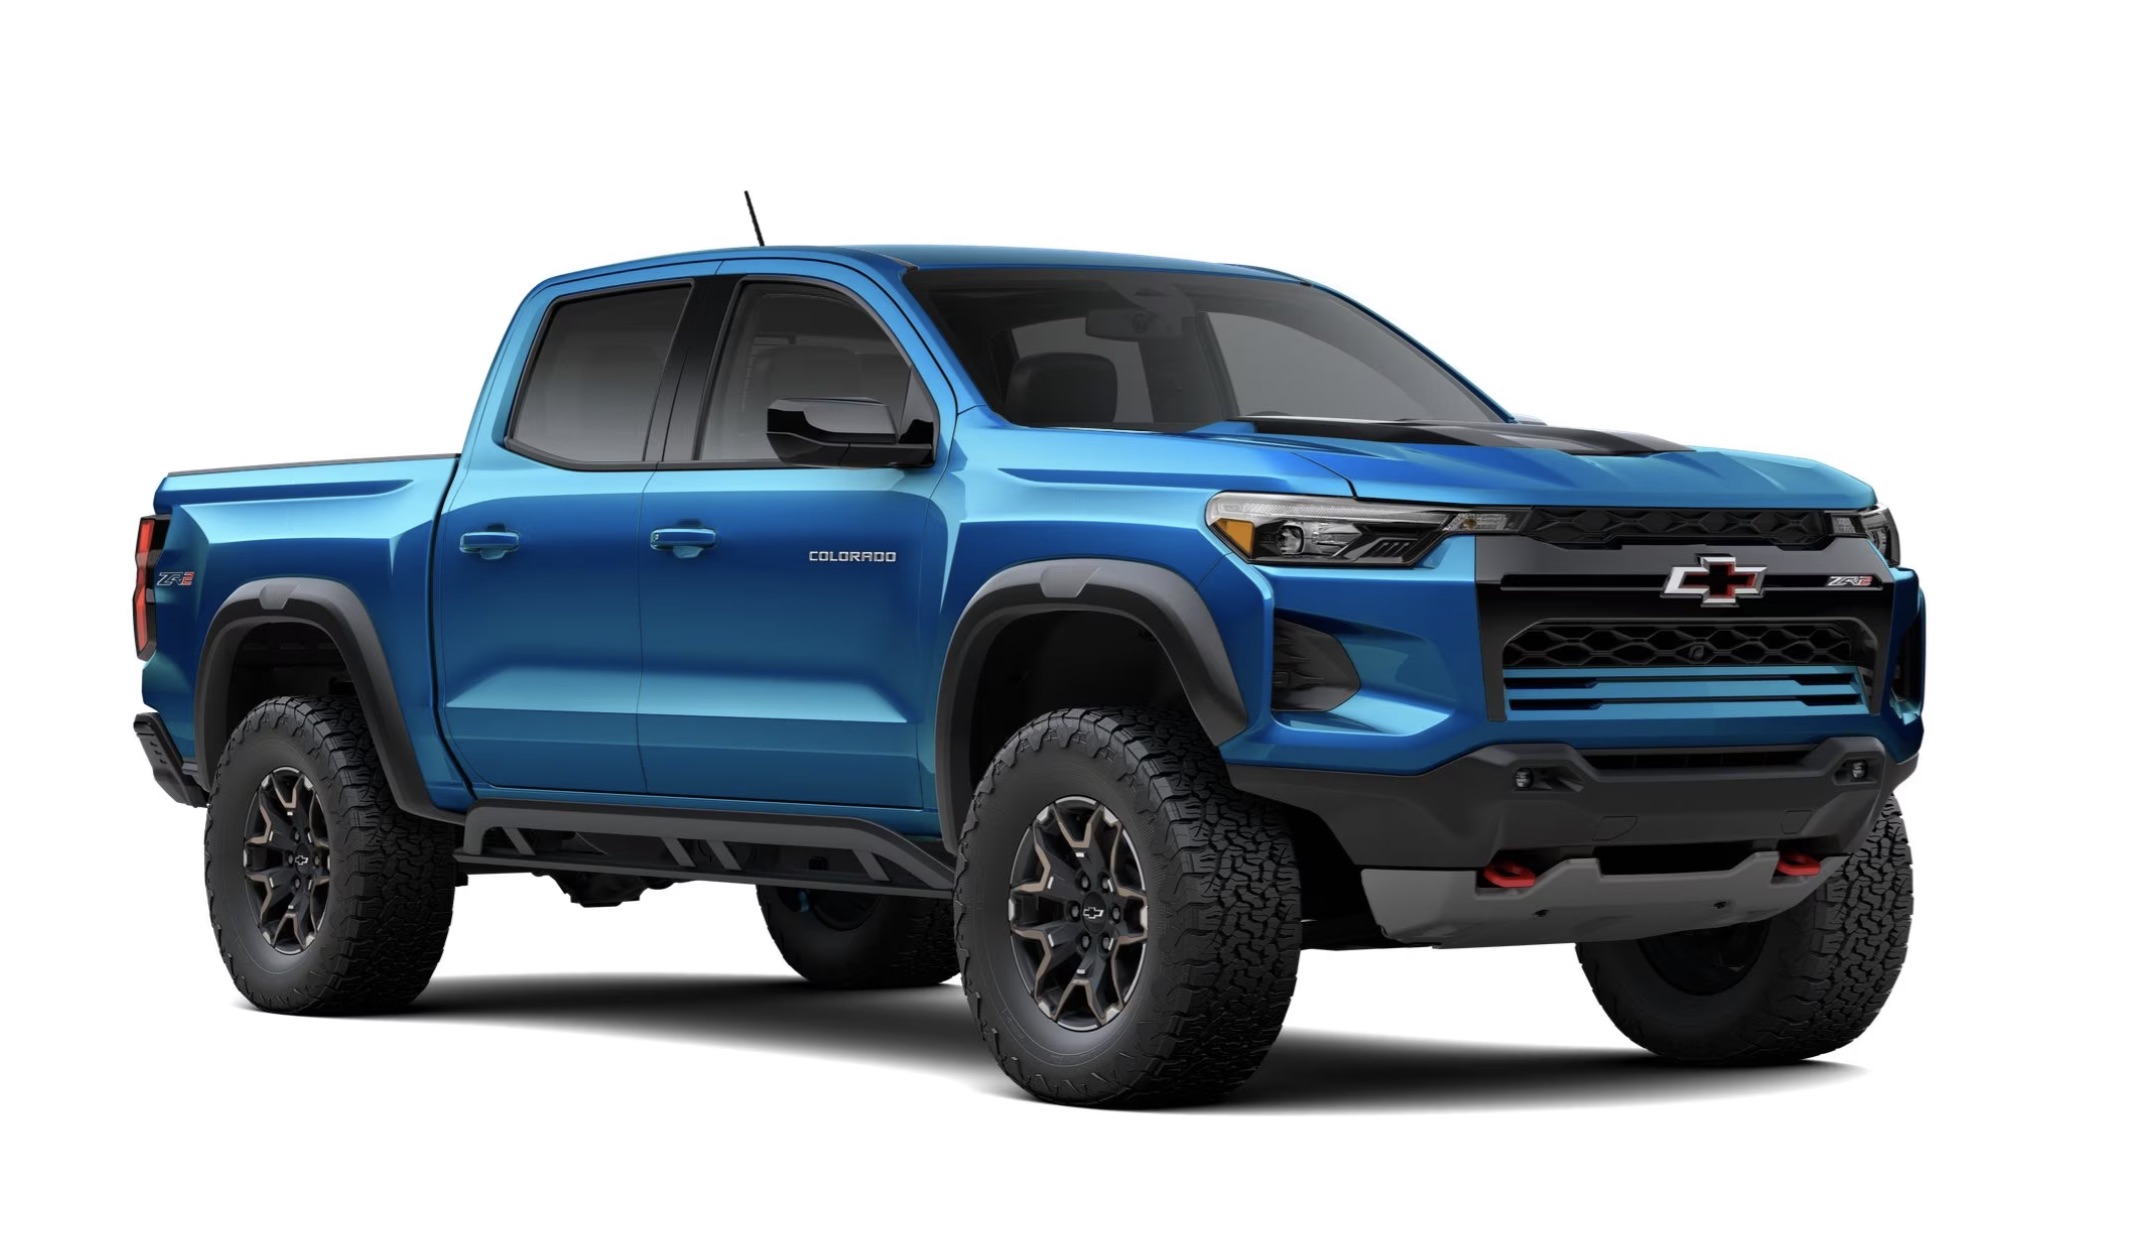 2023 CHEVY ZR2 in blue from Lou Bachrodt Chevrolet